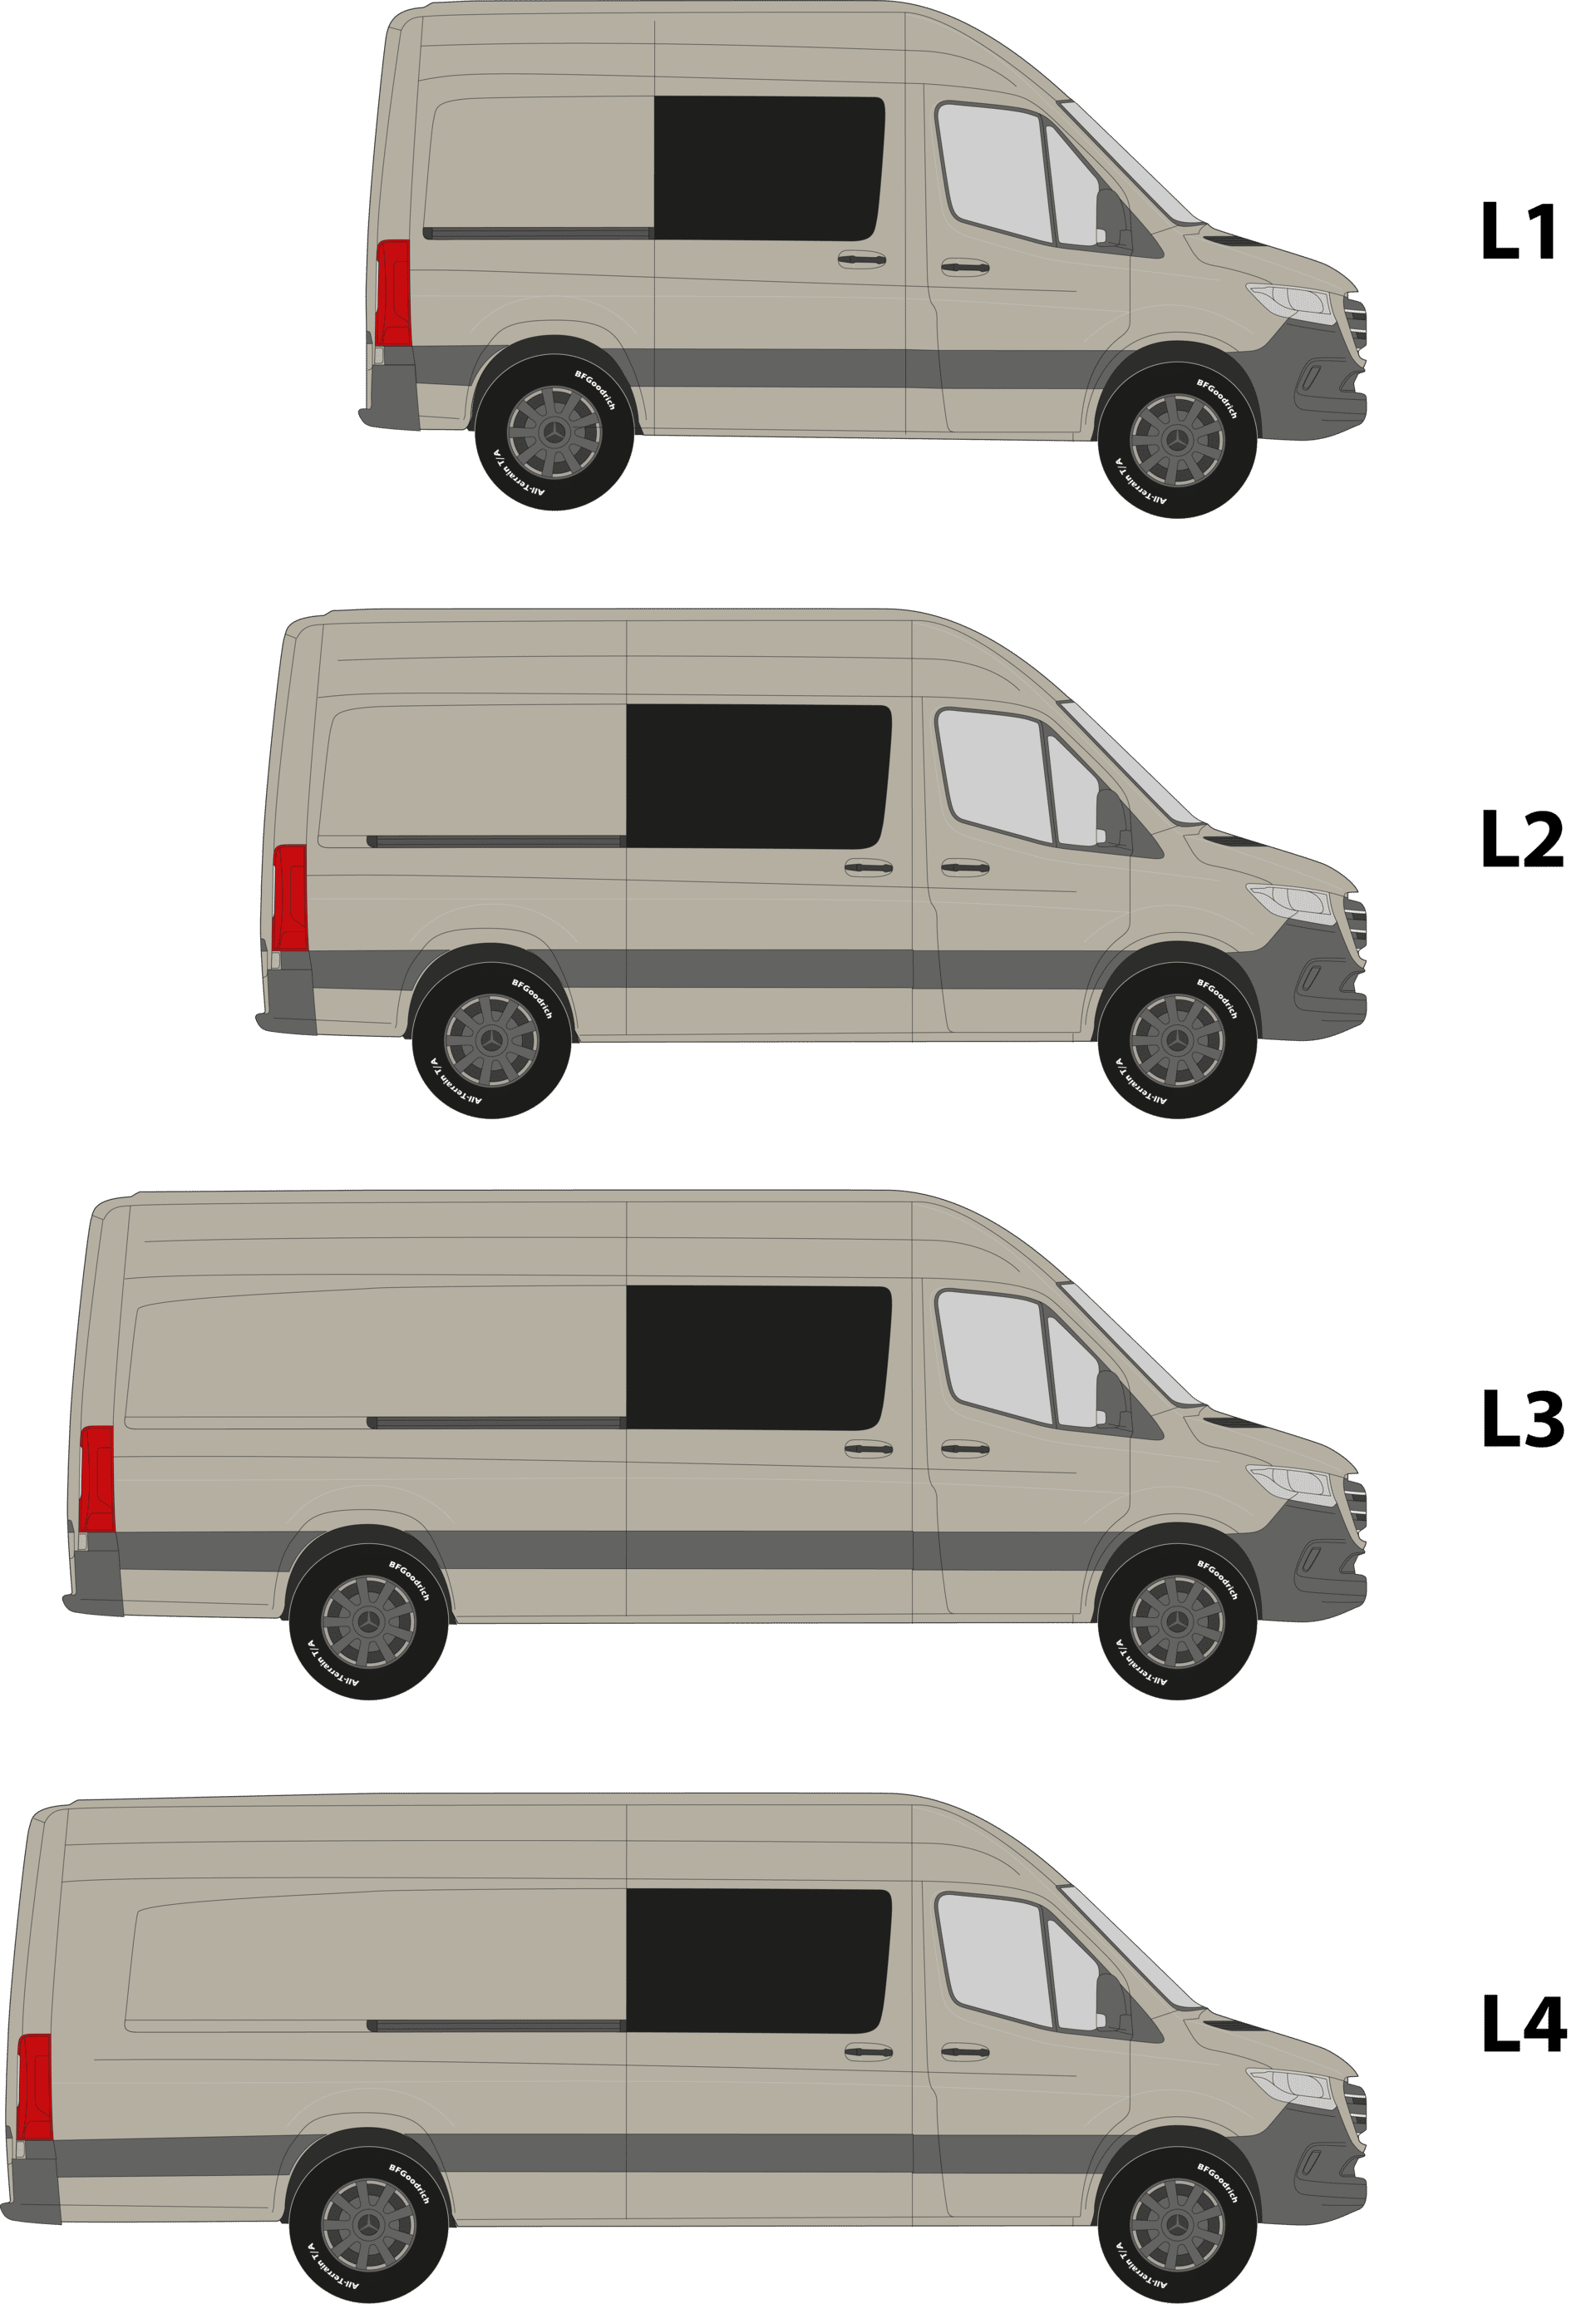 https://www.dutchvanparts.com/wp-content/uploads/2023/06/Illustrations-of-different-Sprinter-lengths-1.png